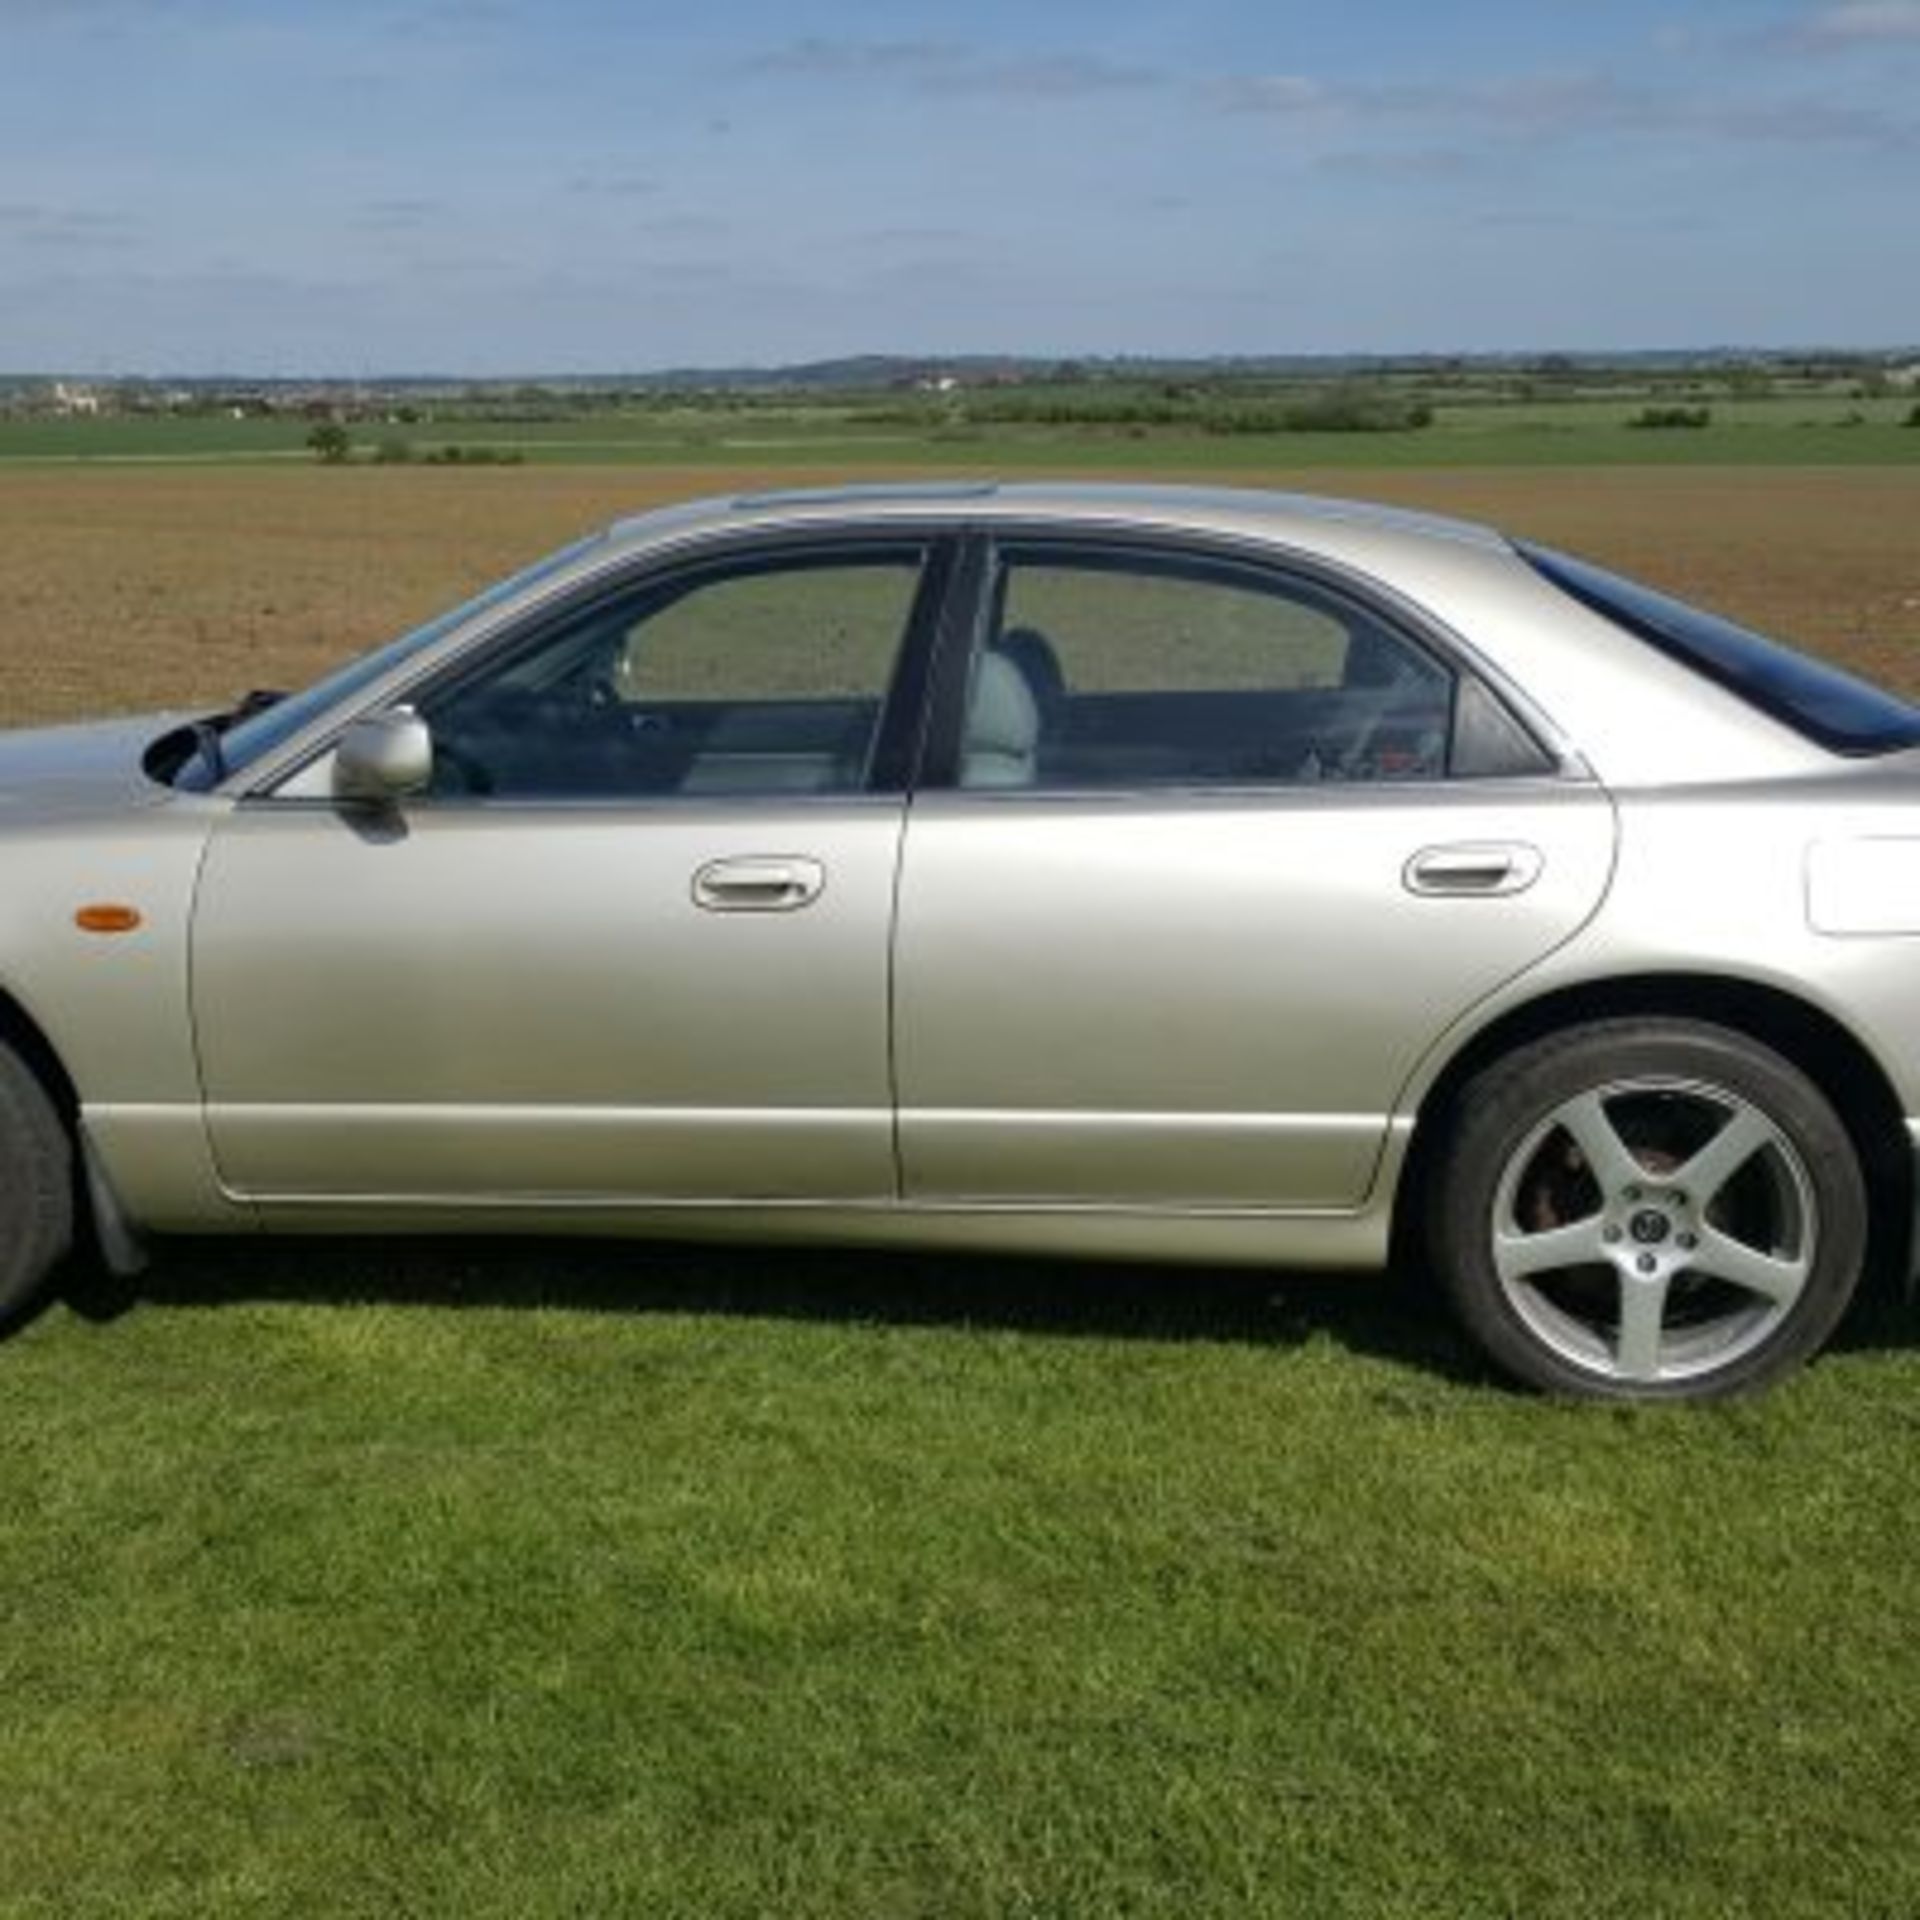 Mazda Xedos 9 “Miller” 2000 - This next car from t - Image 2 of 12